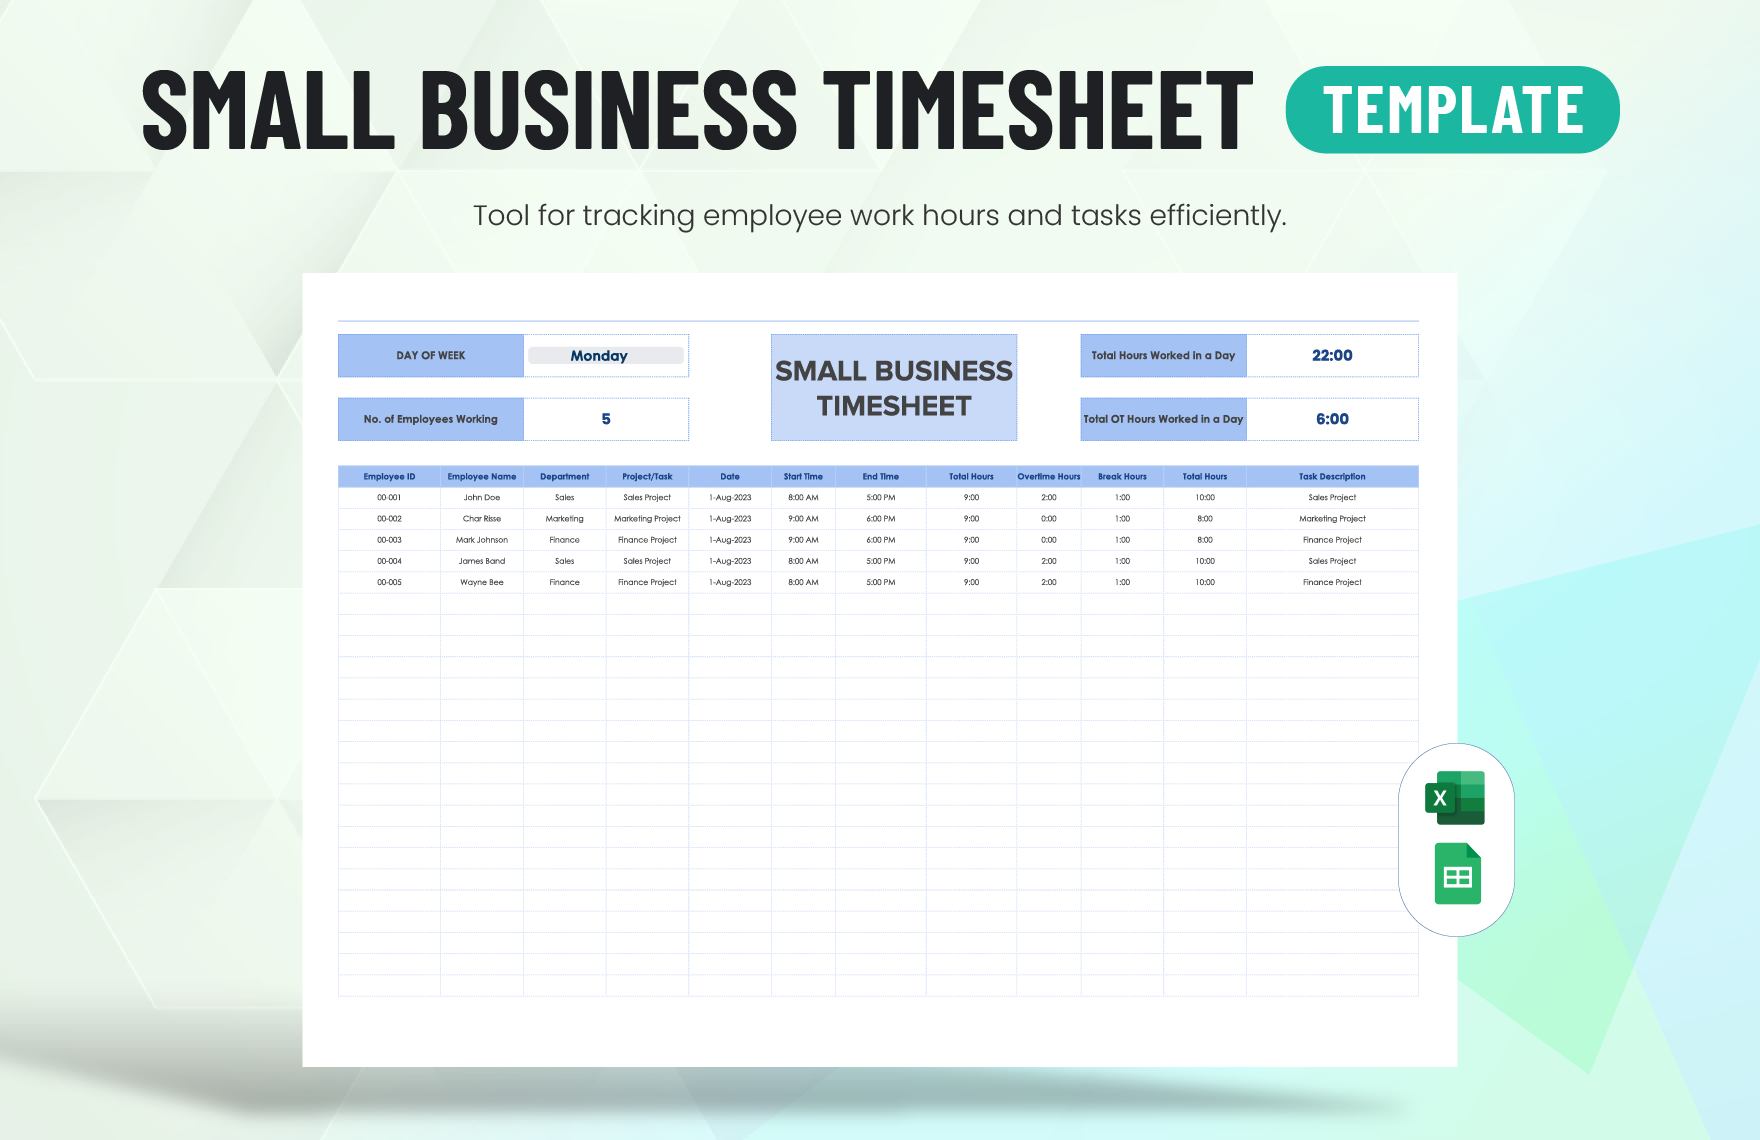 Small Business Timesheet Template in Excel, Google Sheets